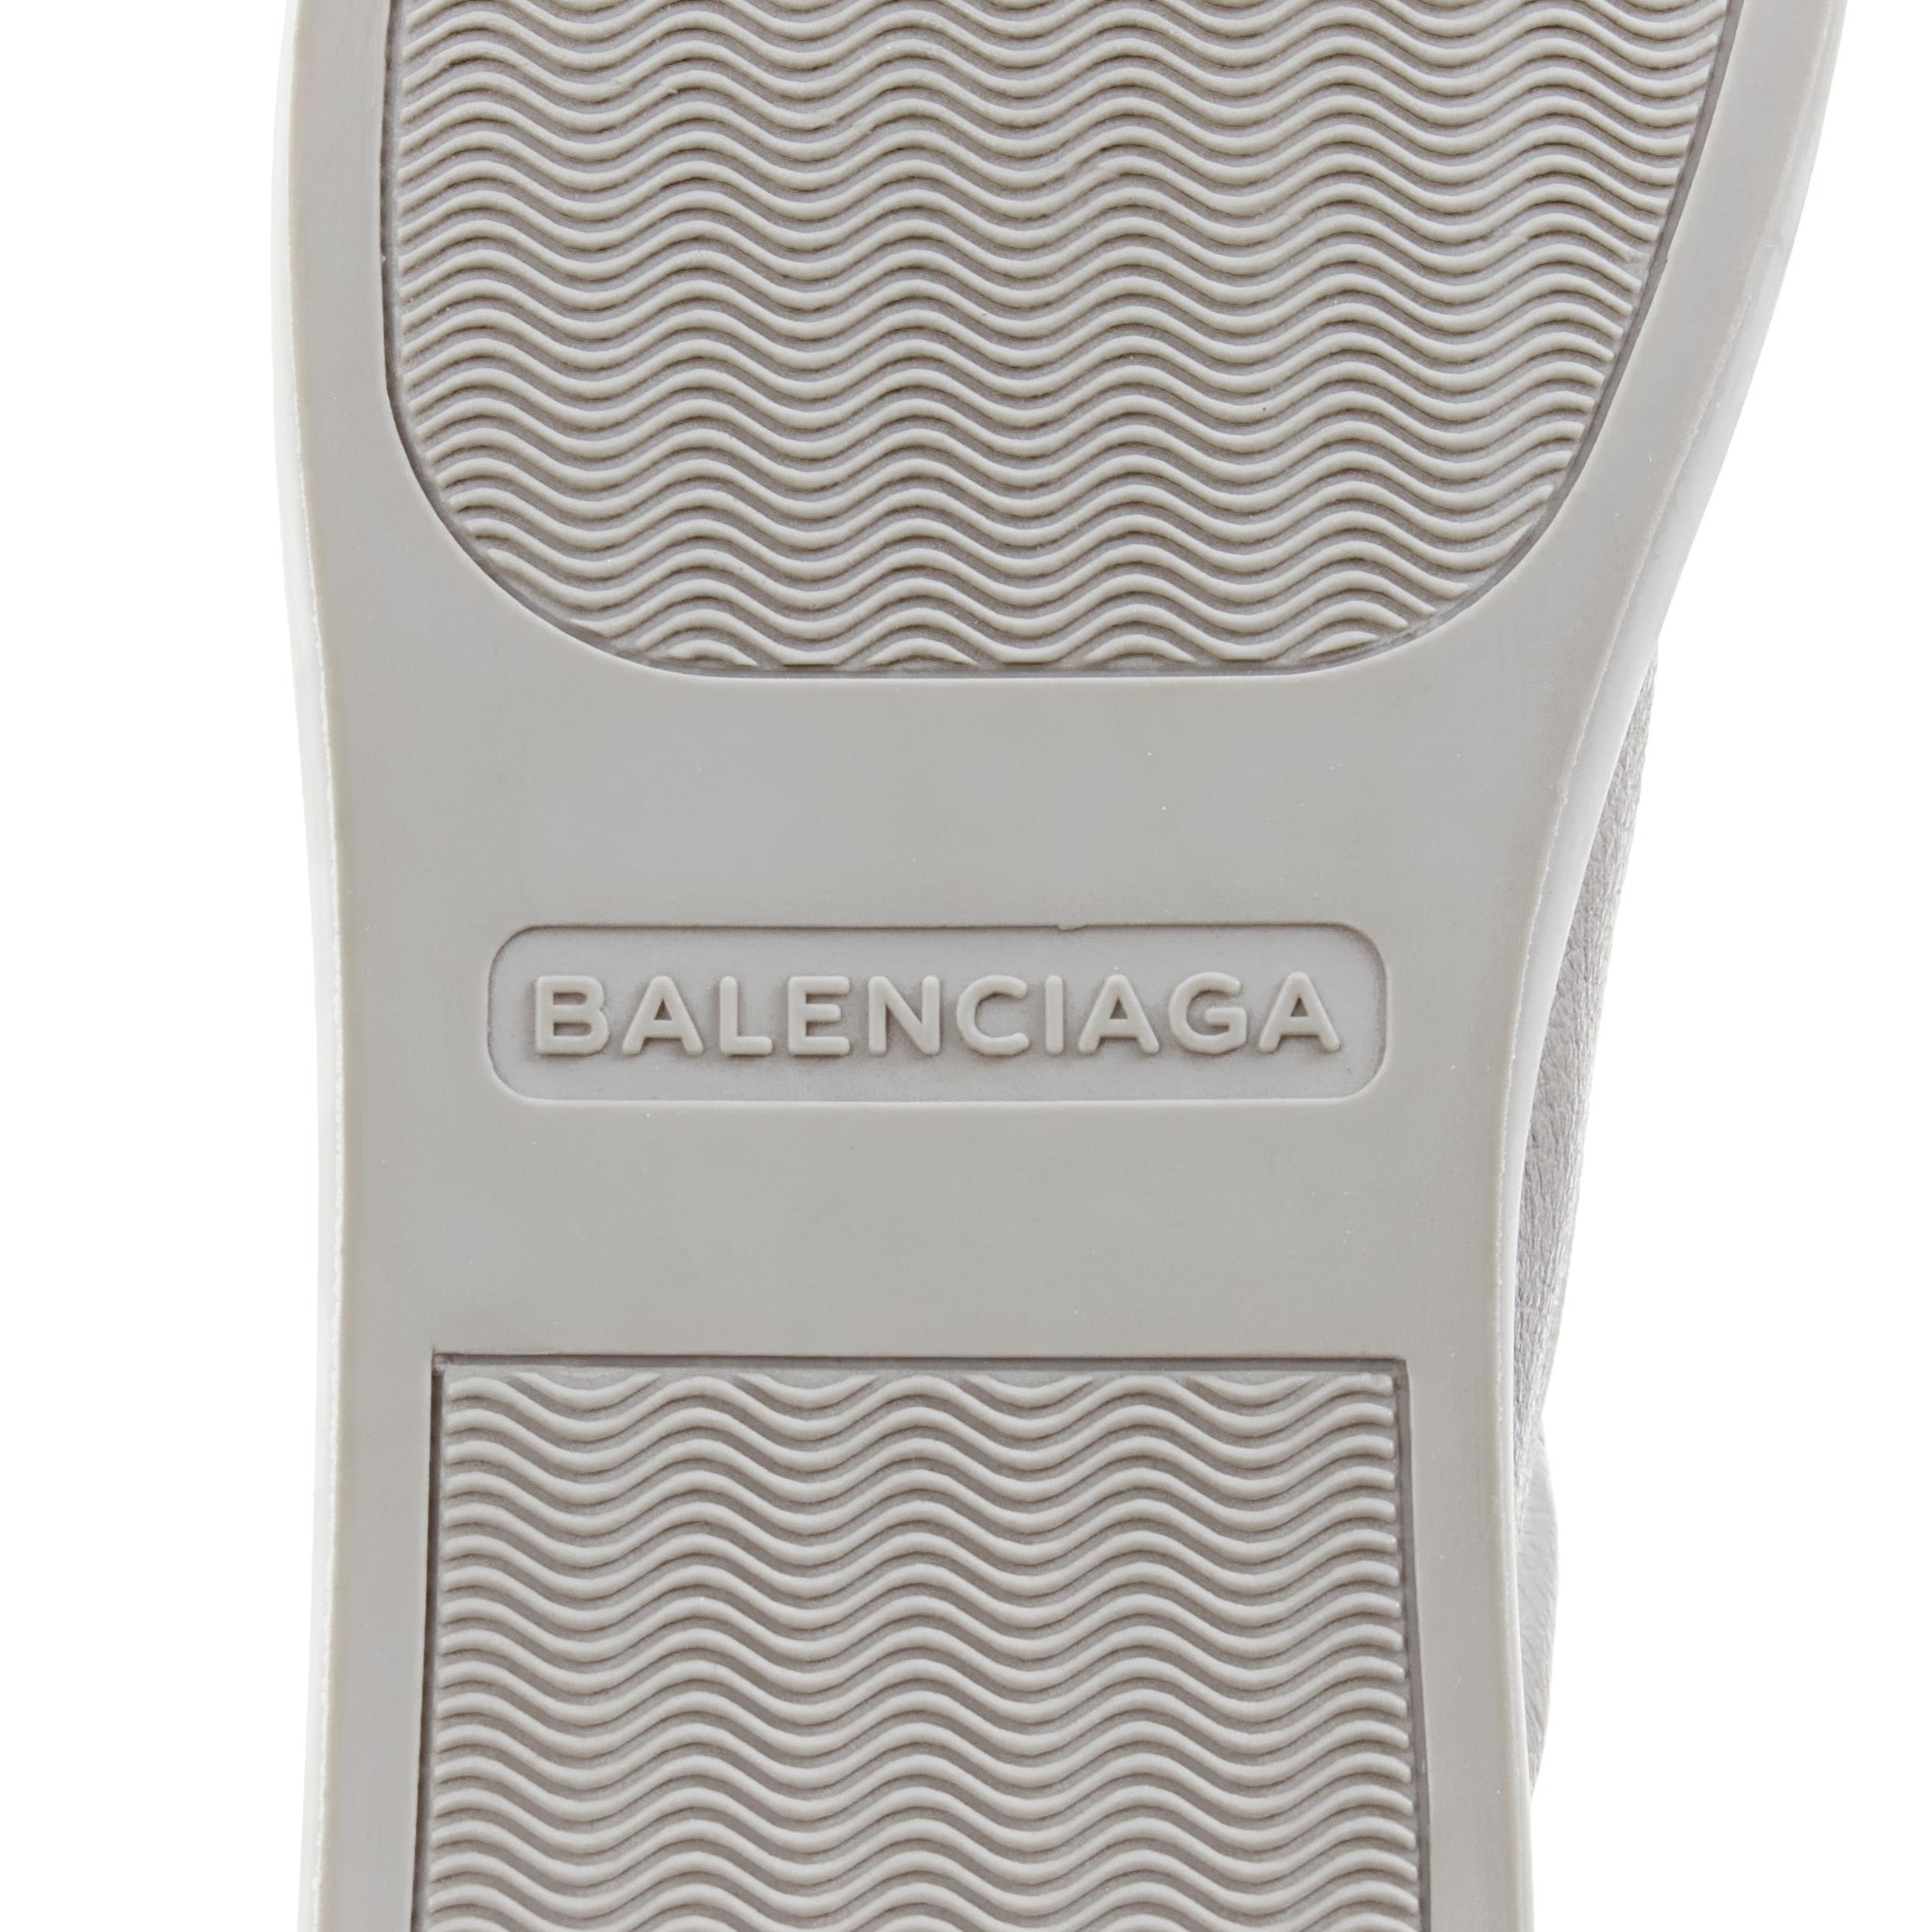 new BALENCIAGA DEMNA Arena Pyrite Grey grained leather low top sneakers EU41 US8 For Sale 2